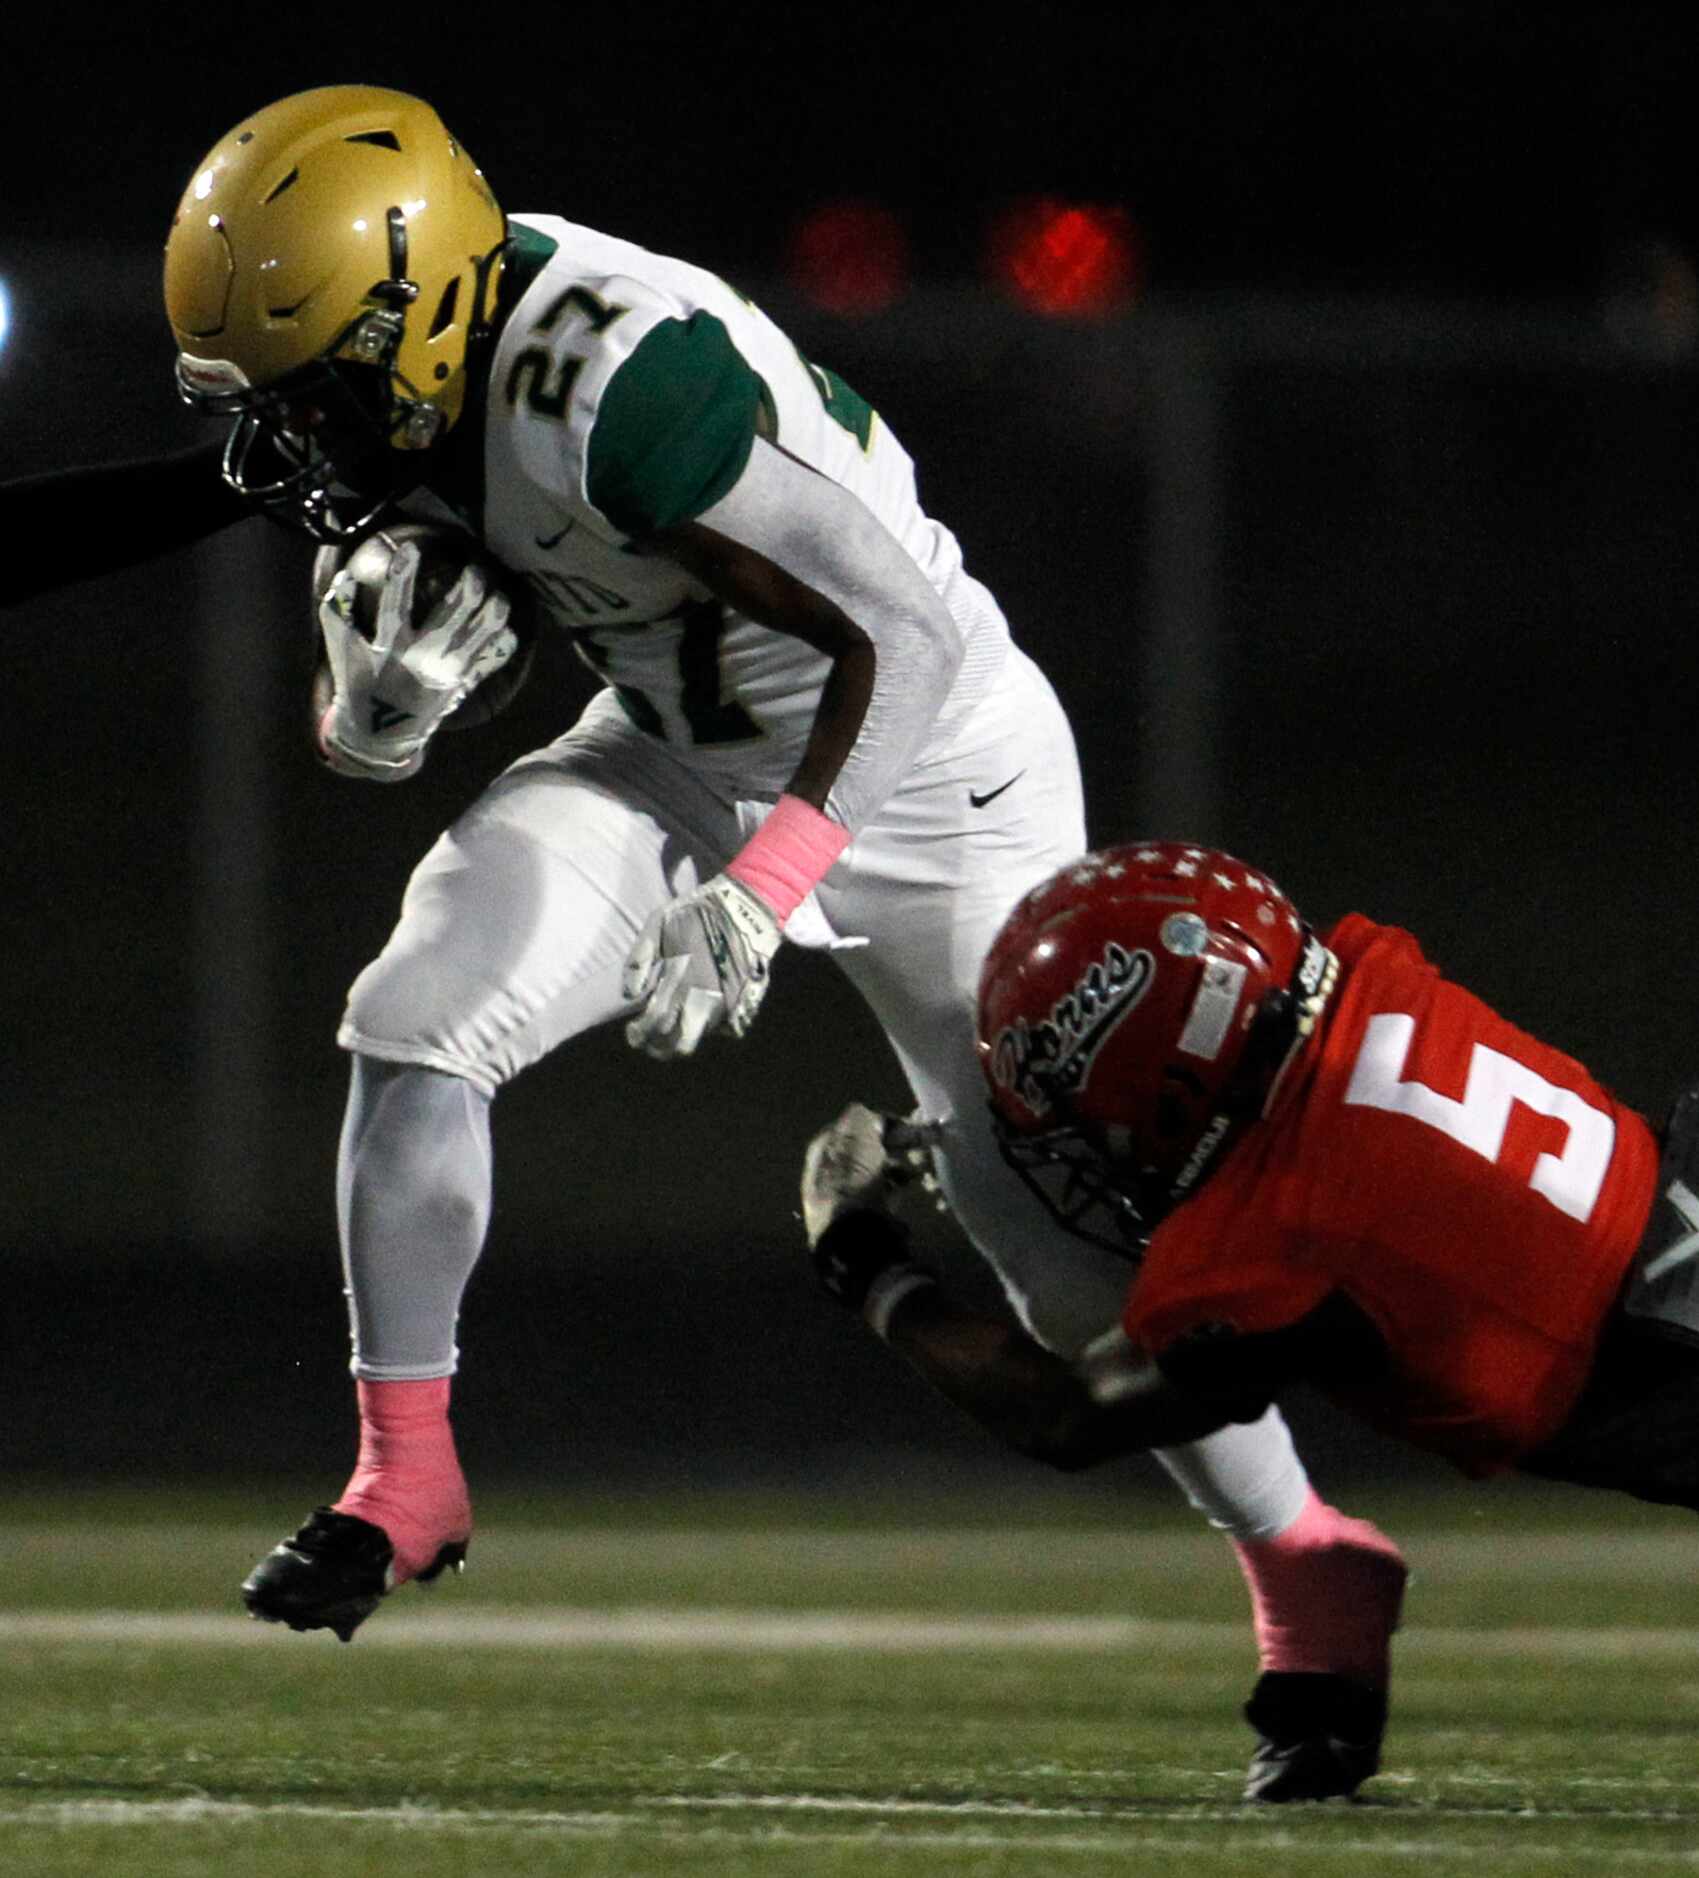 DeSoto running back Marvin Duffy (27) rushes for a first down before being tackled by Cedar...